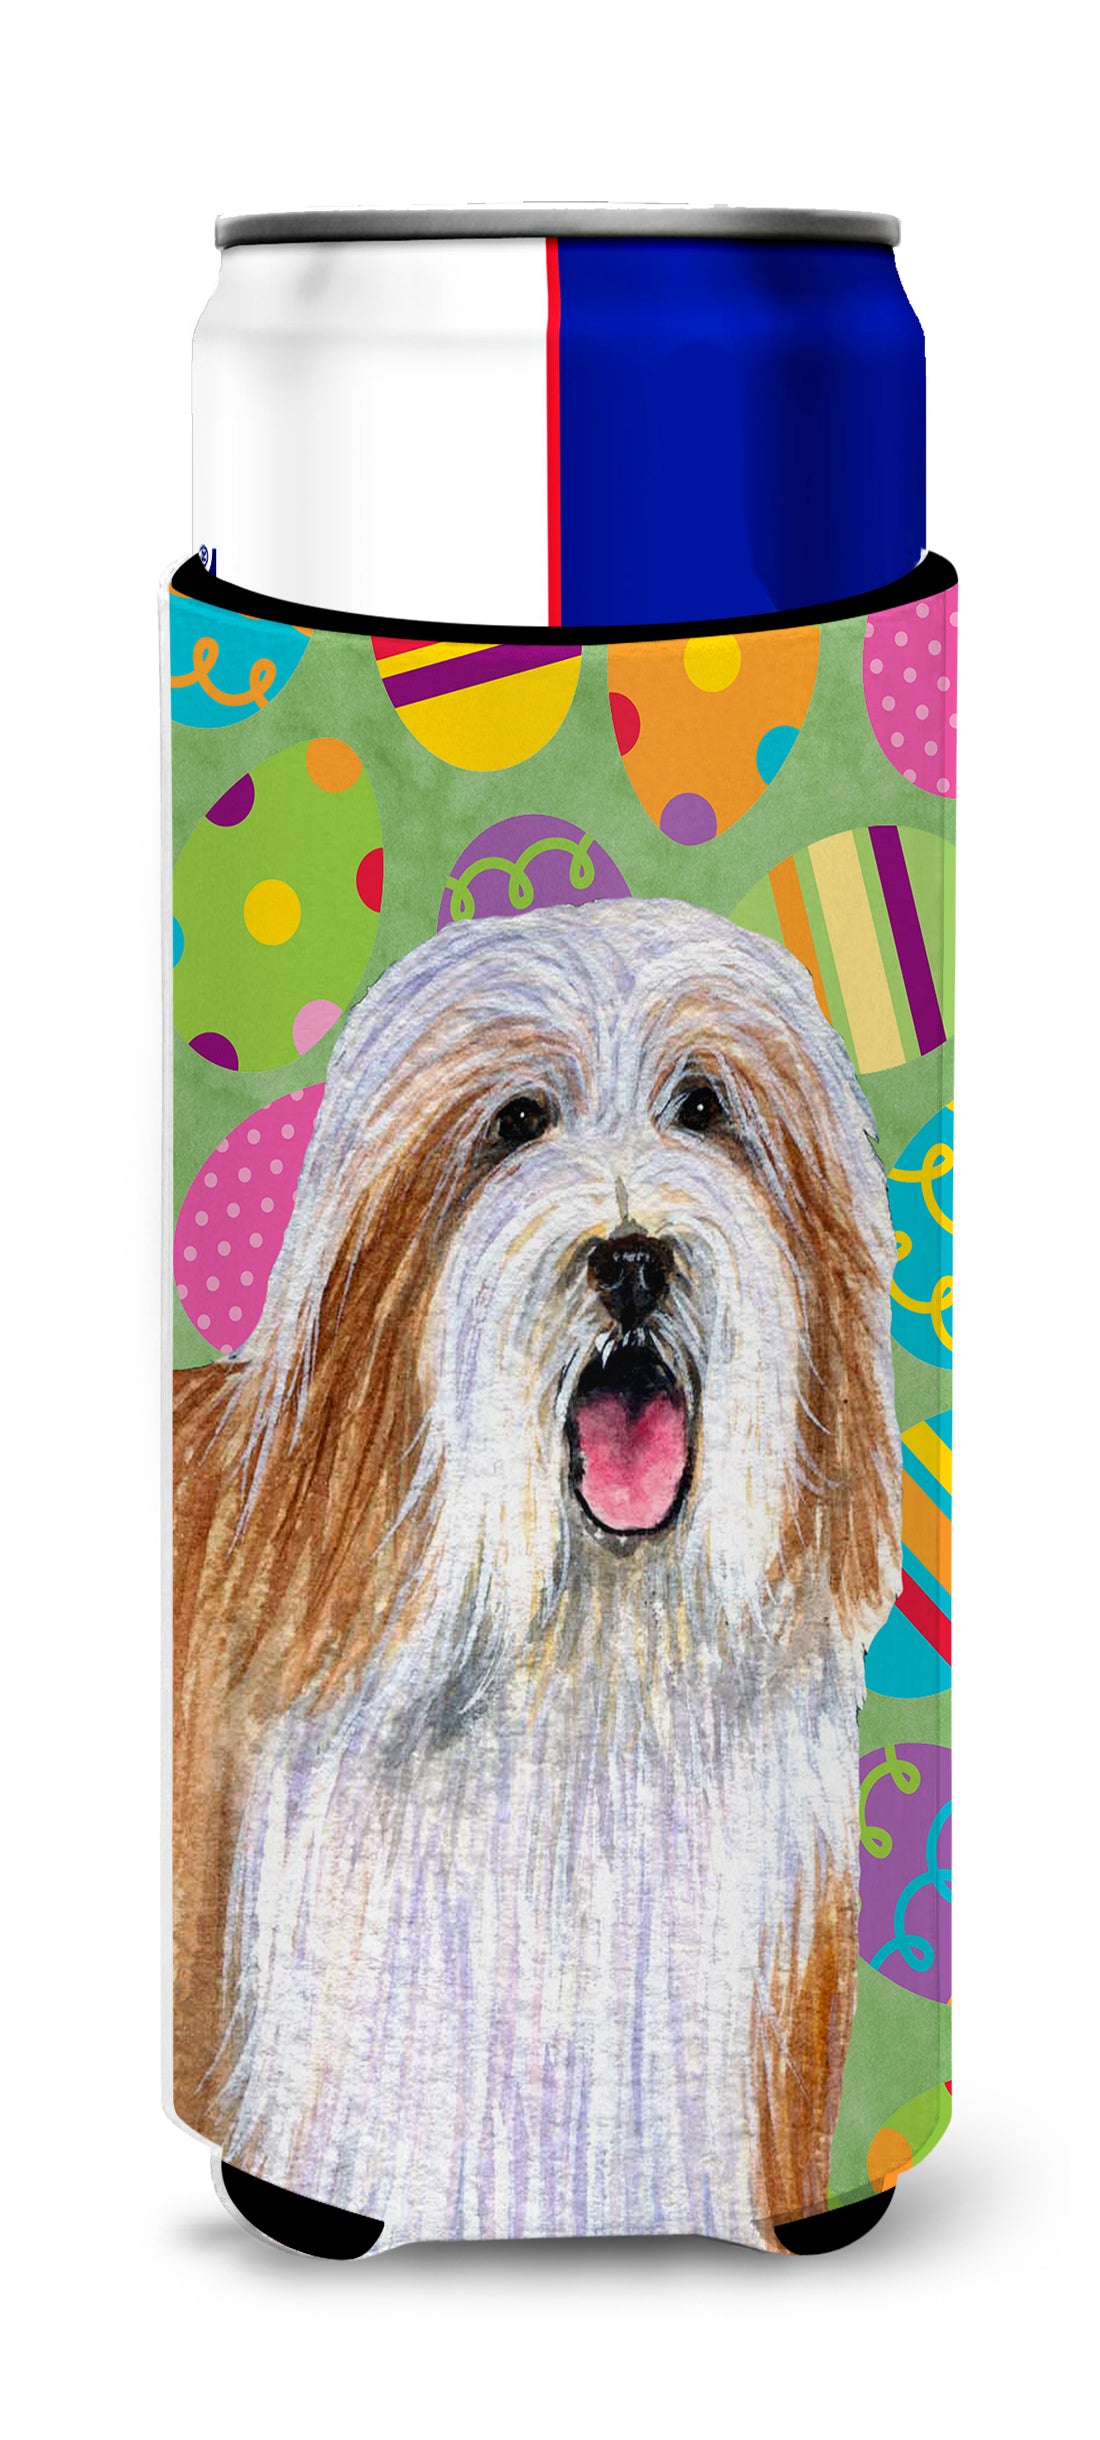 Bearded Collie Easter Eggtravaganza Ultra Beverage Insulators for slim cans LH9420MUK.